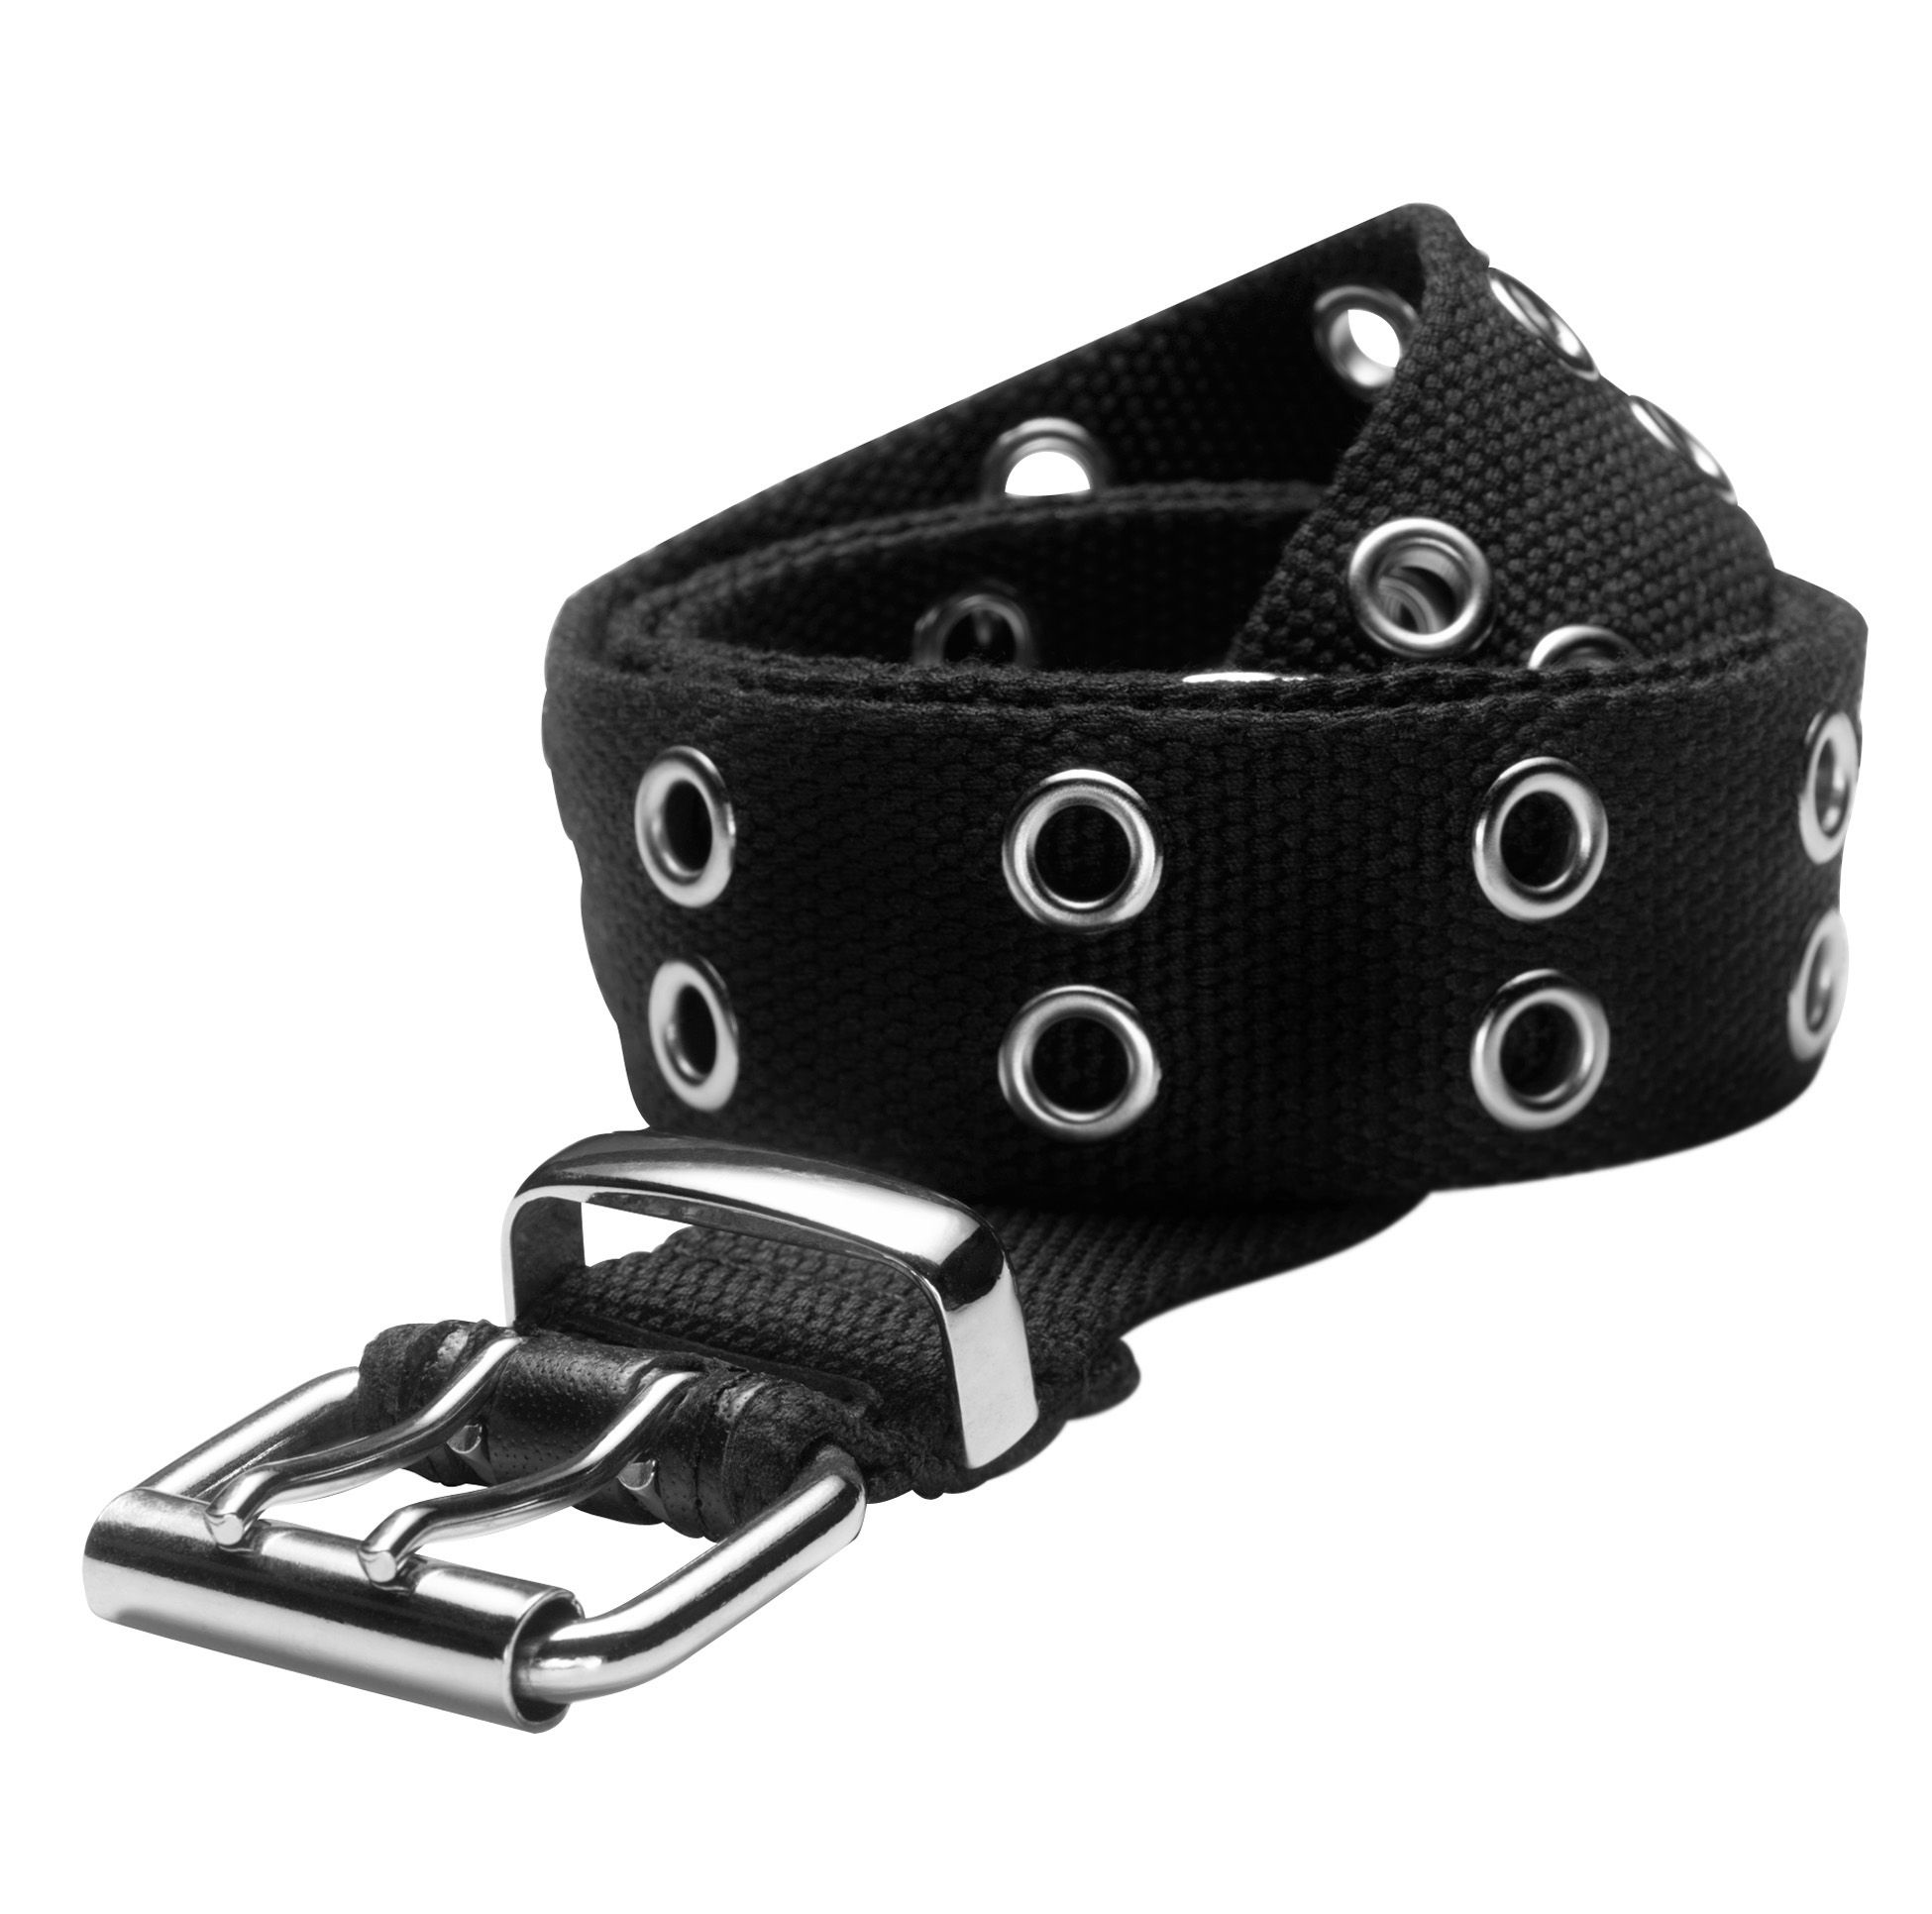 Relic Double Prong Belt with Double Grommets and Silver Buckle